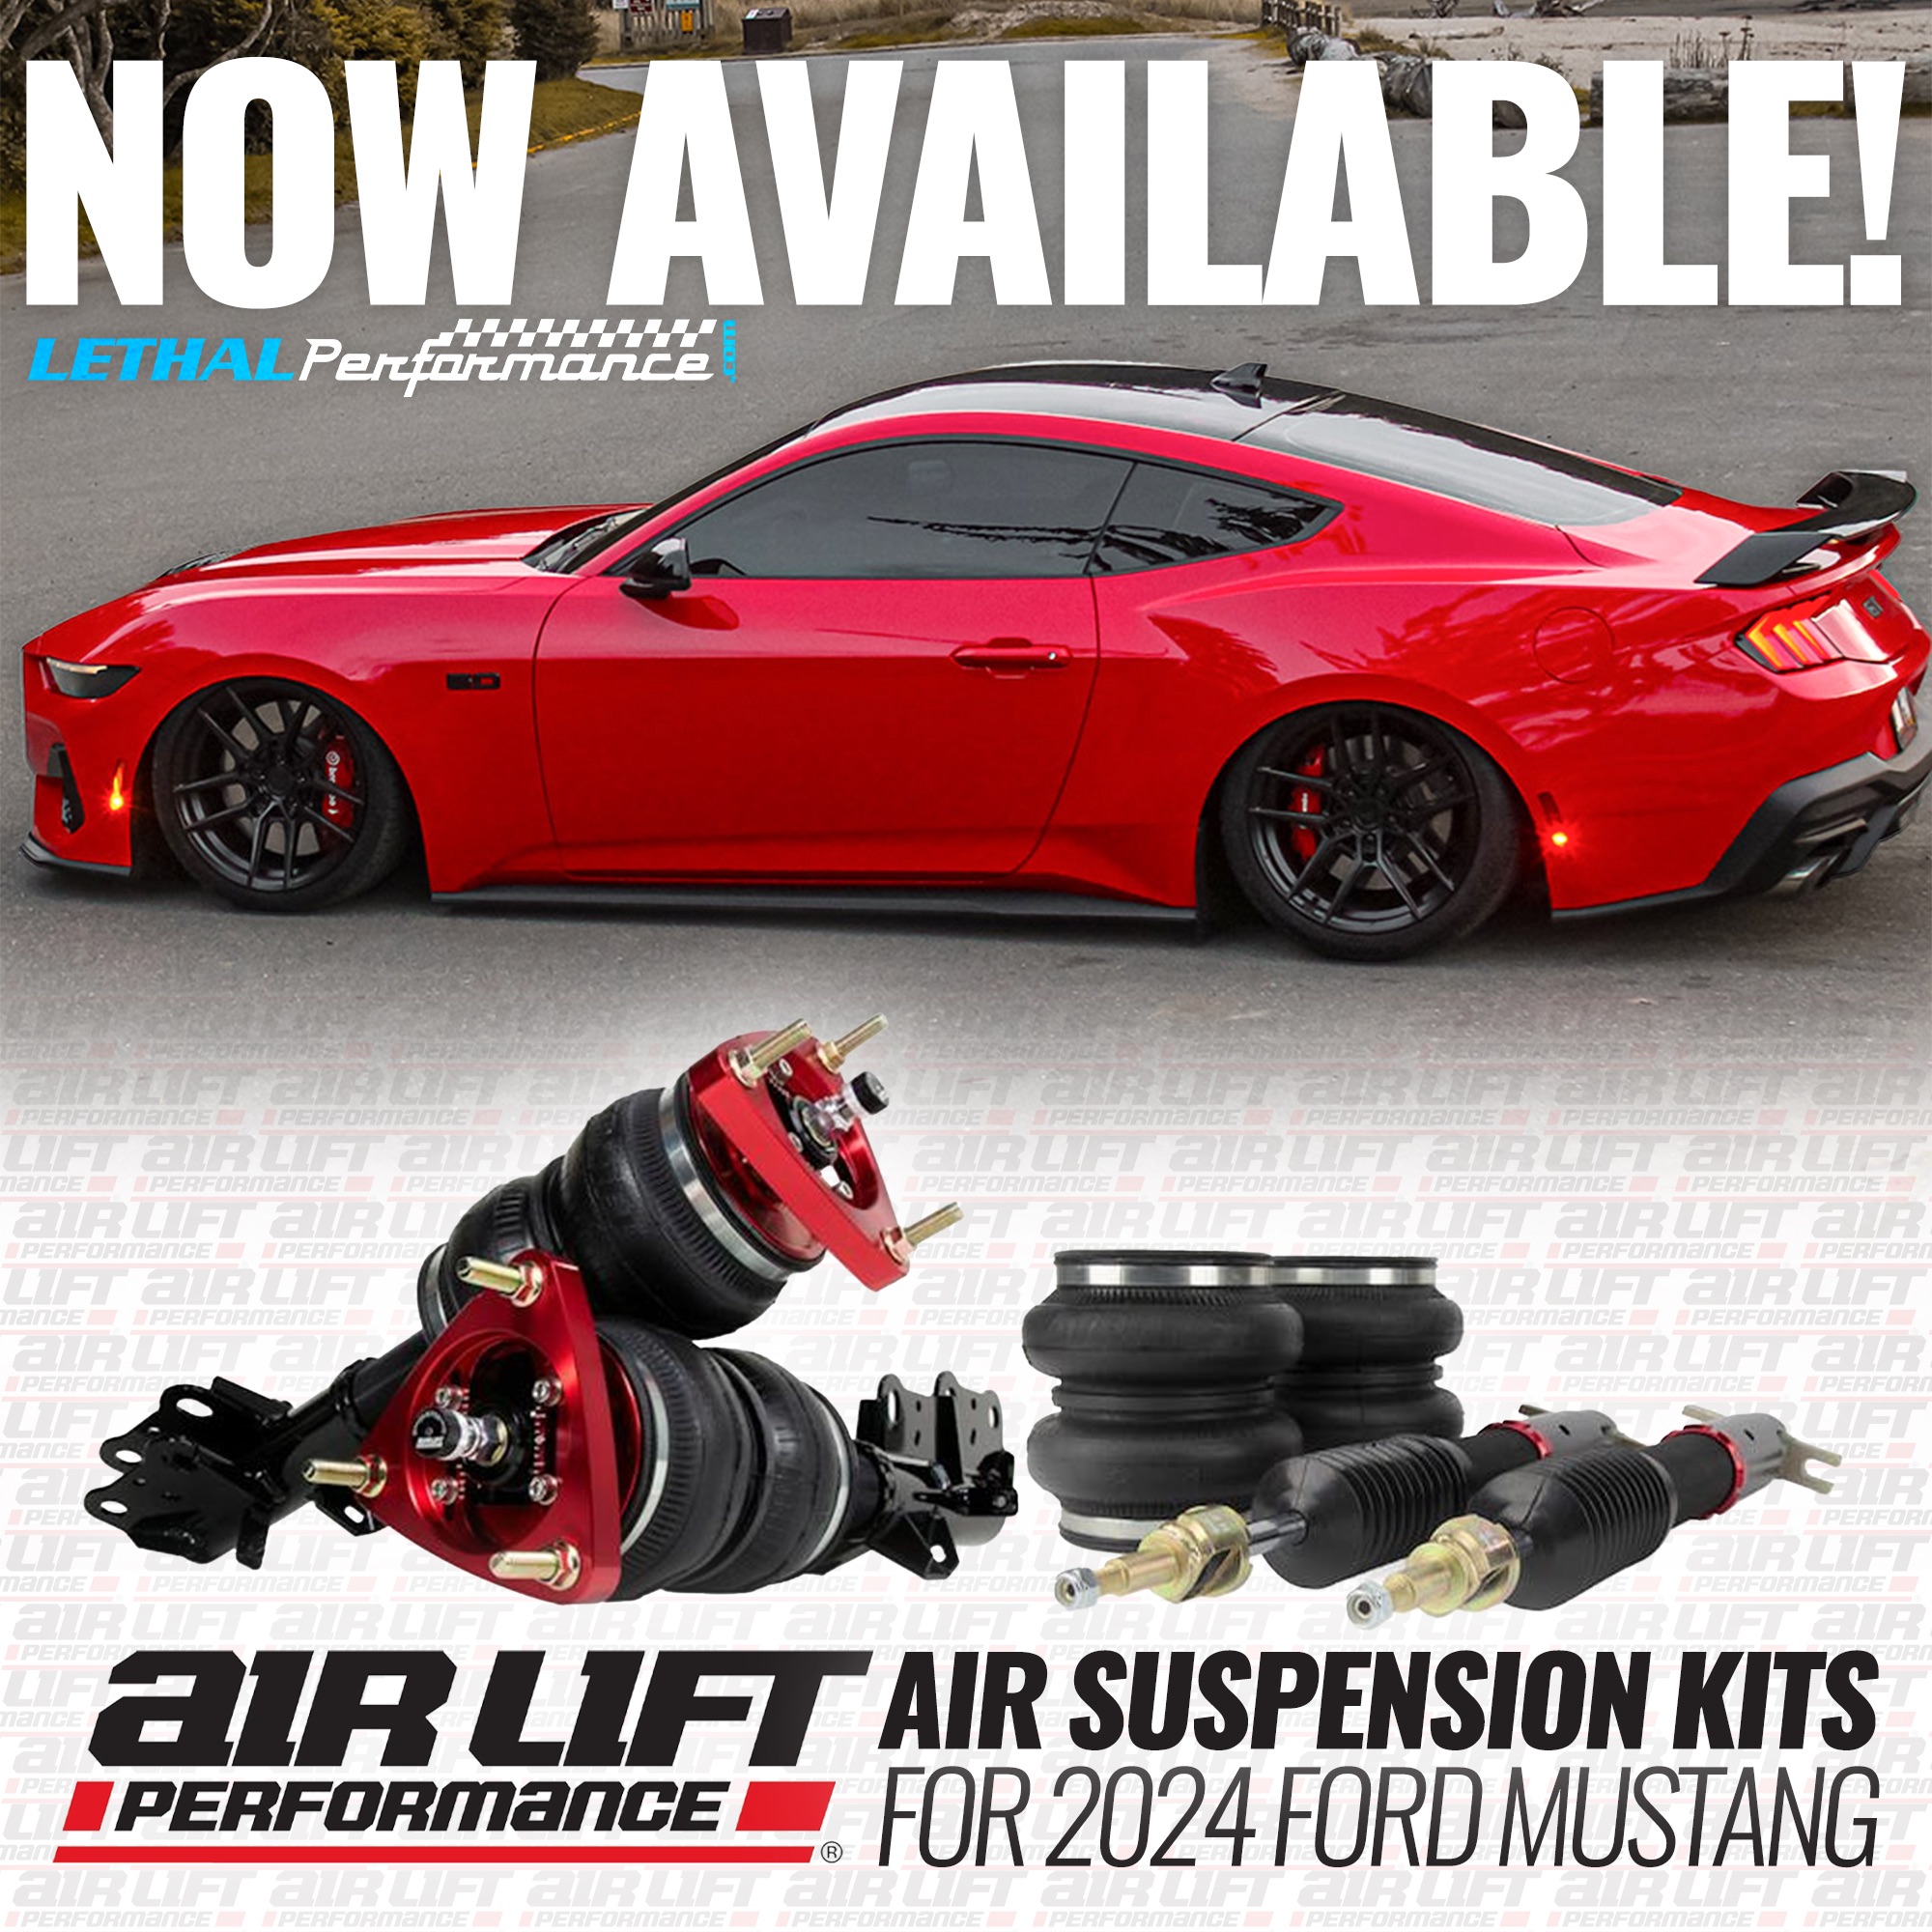 S650 Mustang Air Lift Performance Suspension for 2024 Mustang is HERE! air s650